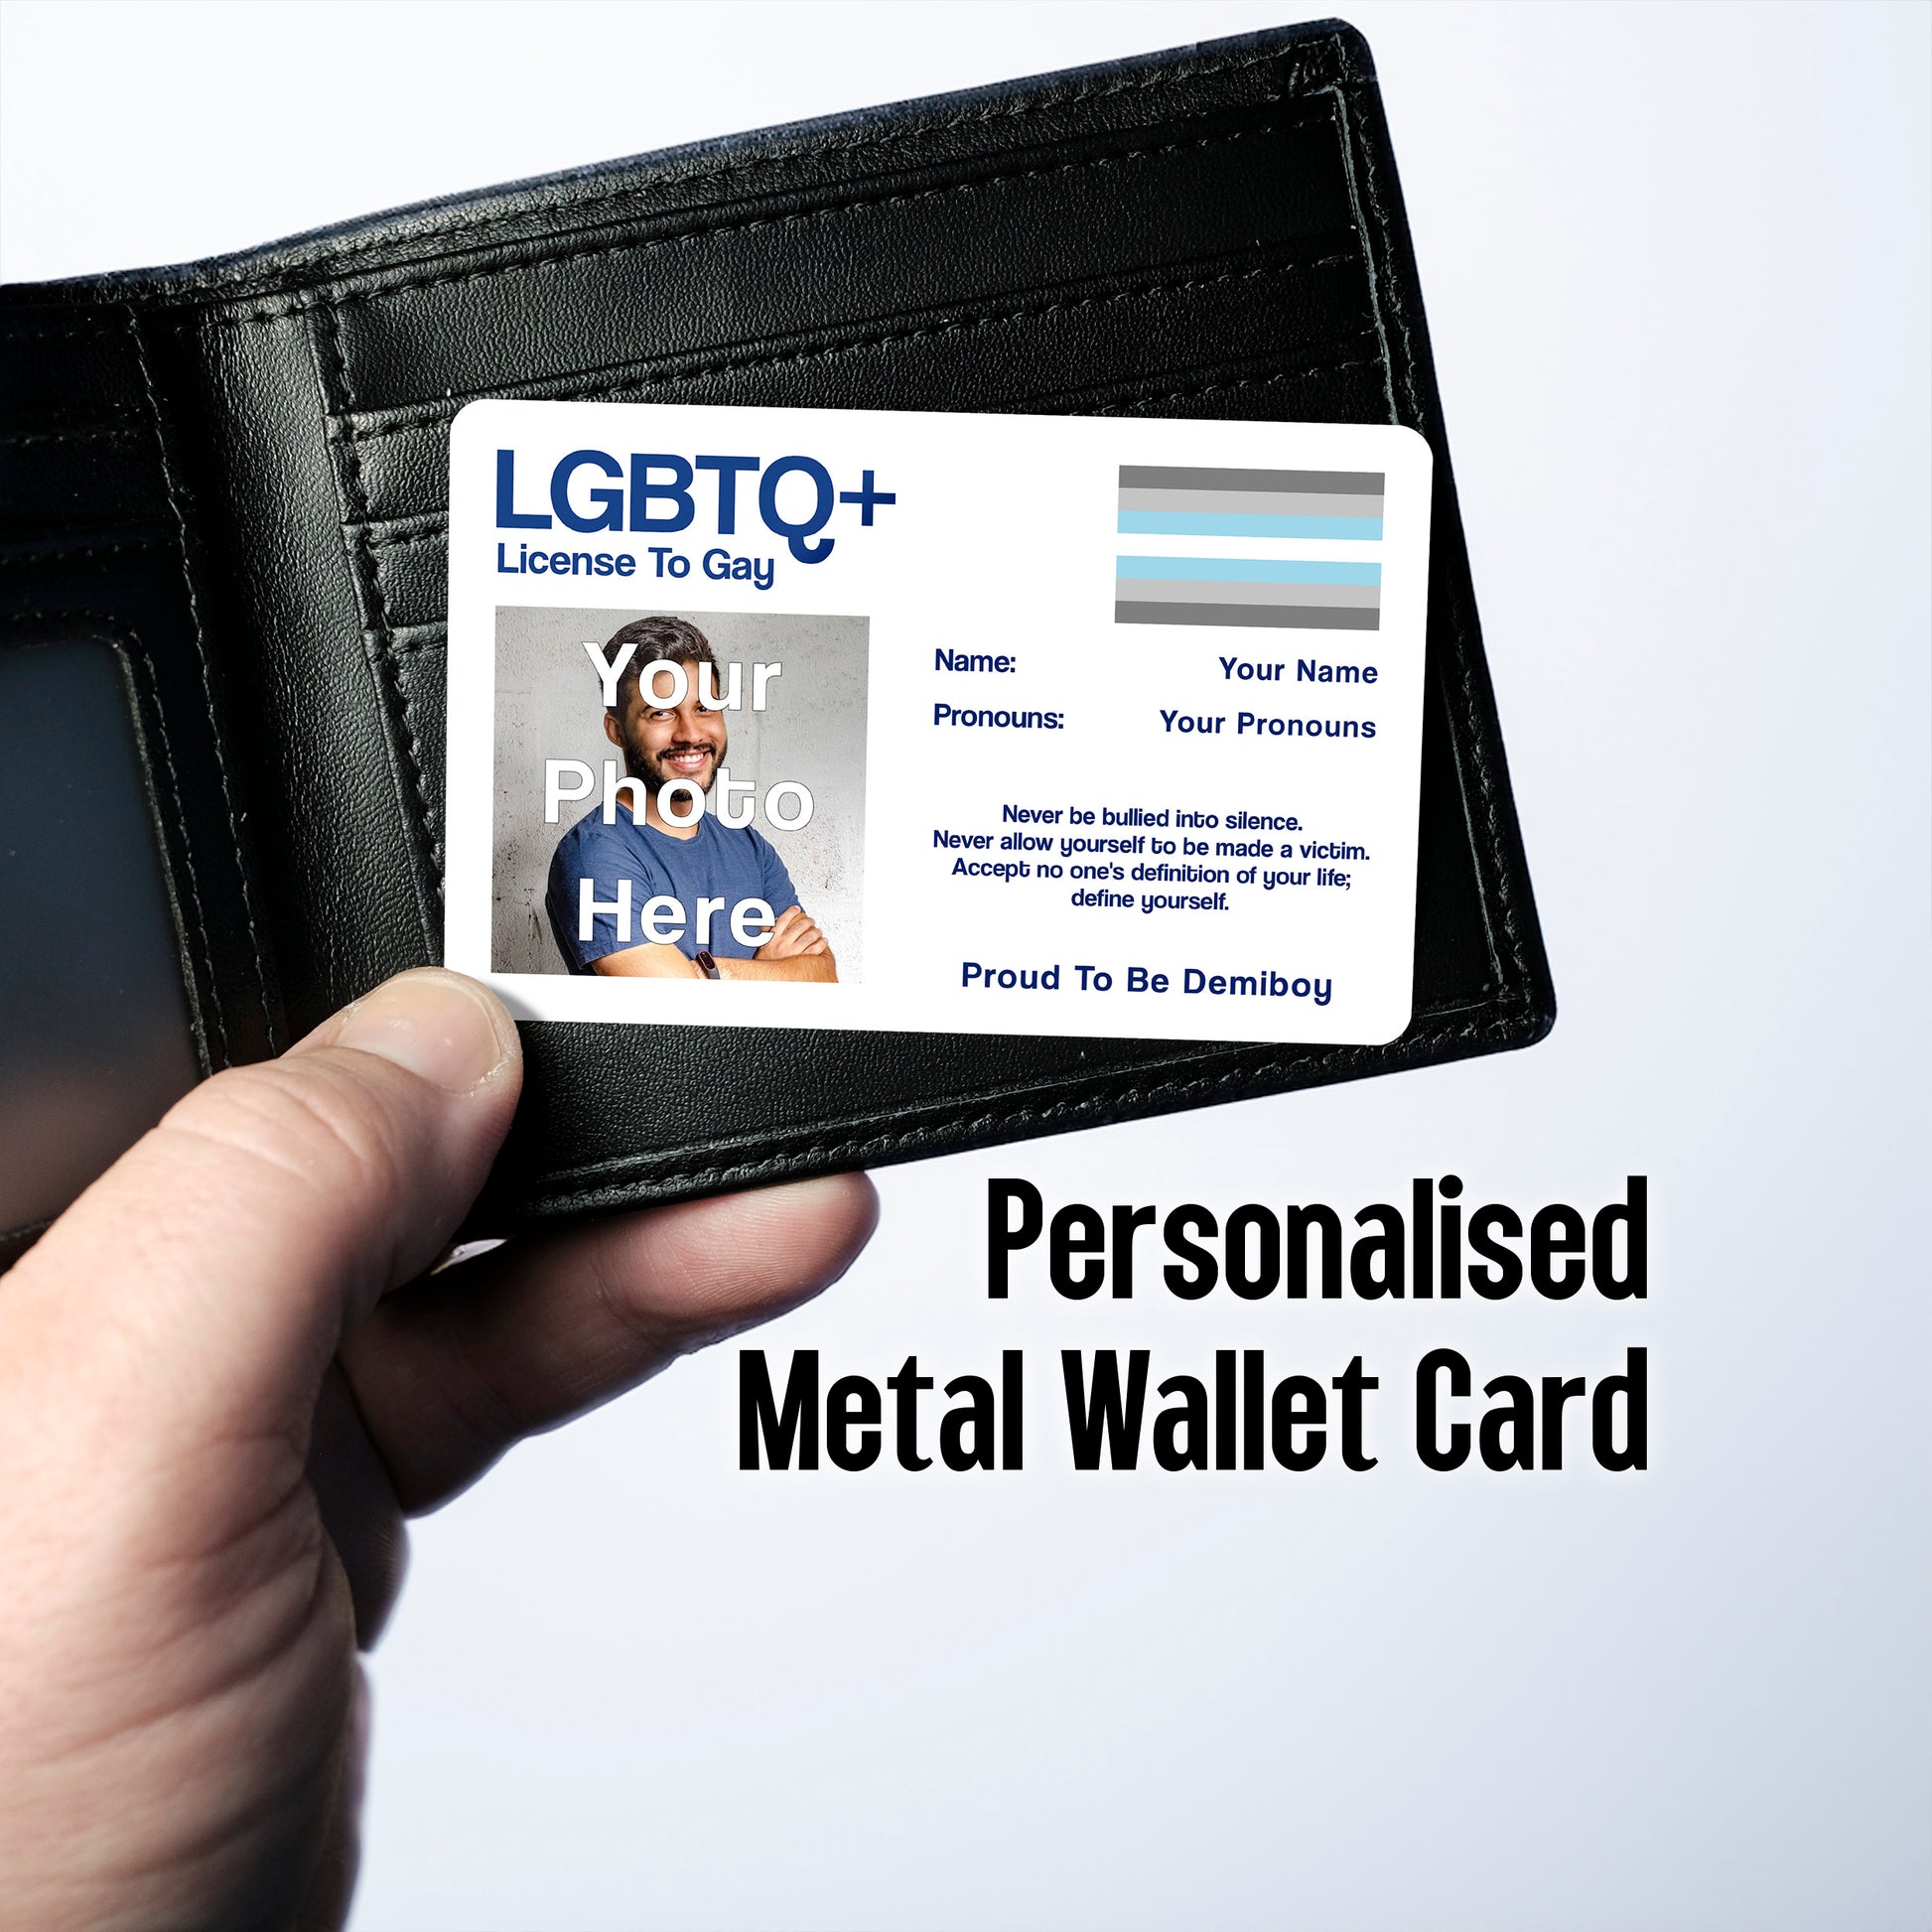 Demiboy license to gay aluminium wallet card personalised with your name, pronouns, and photo